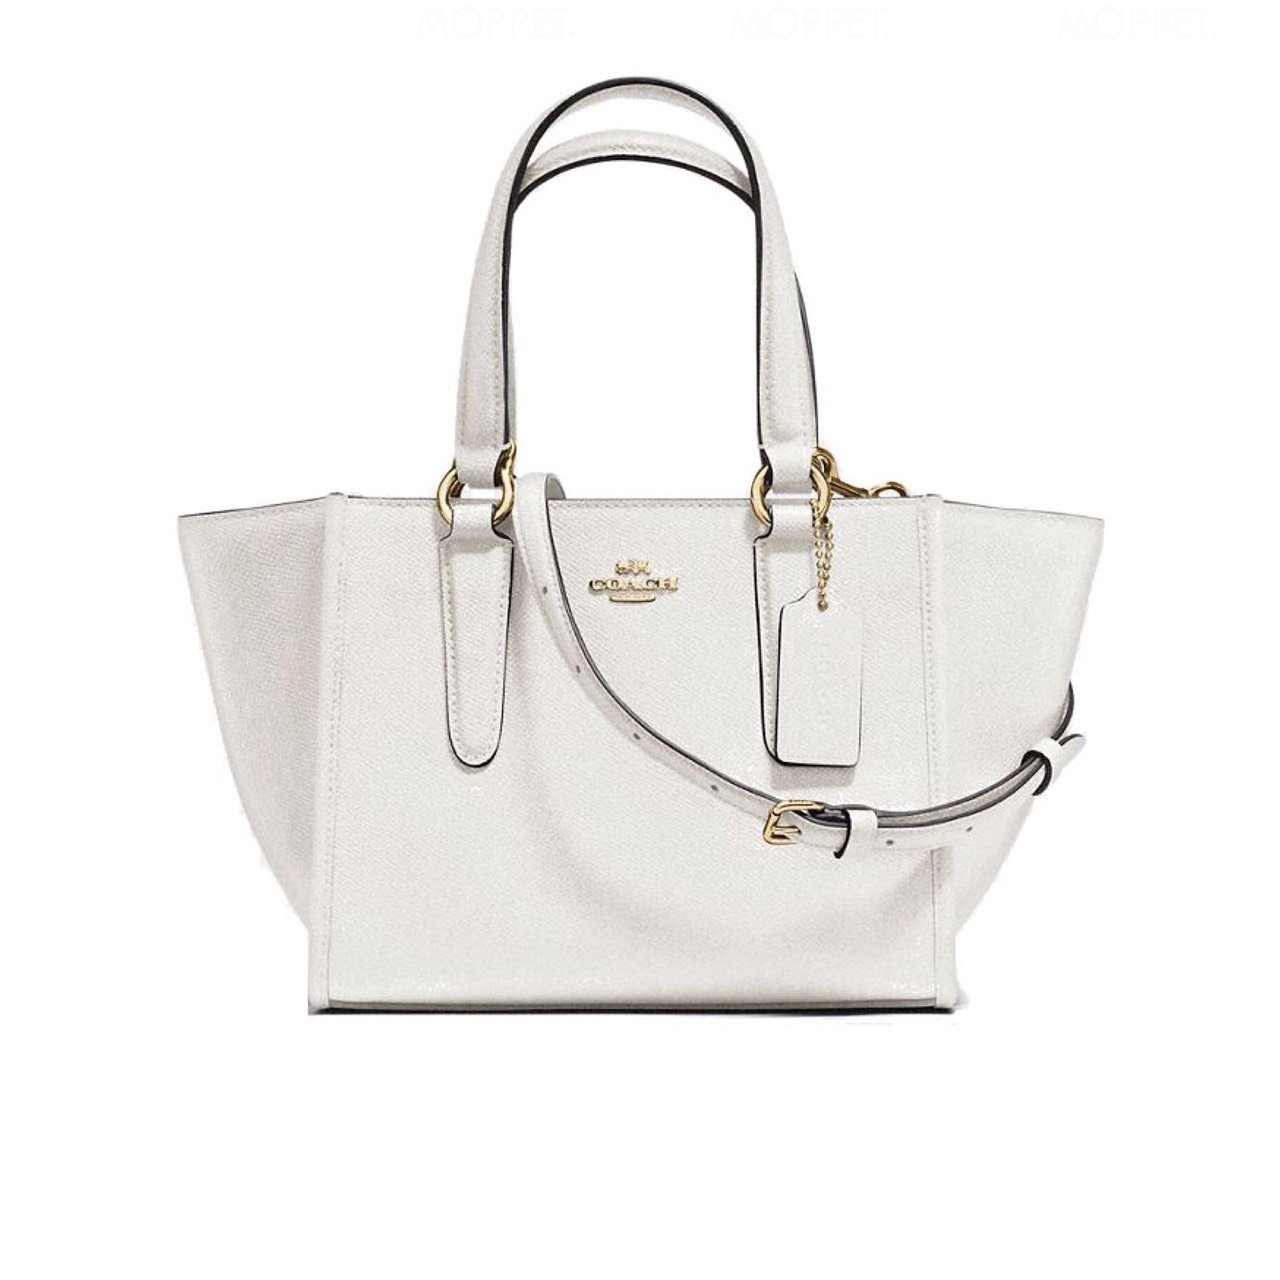 New Coach Crosby Carryall 21 in Chalk Leather GHW - moppetbrandname